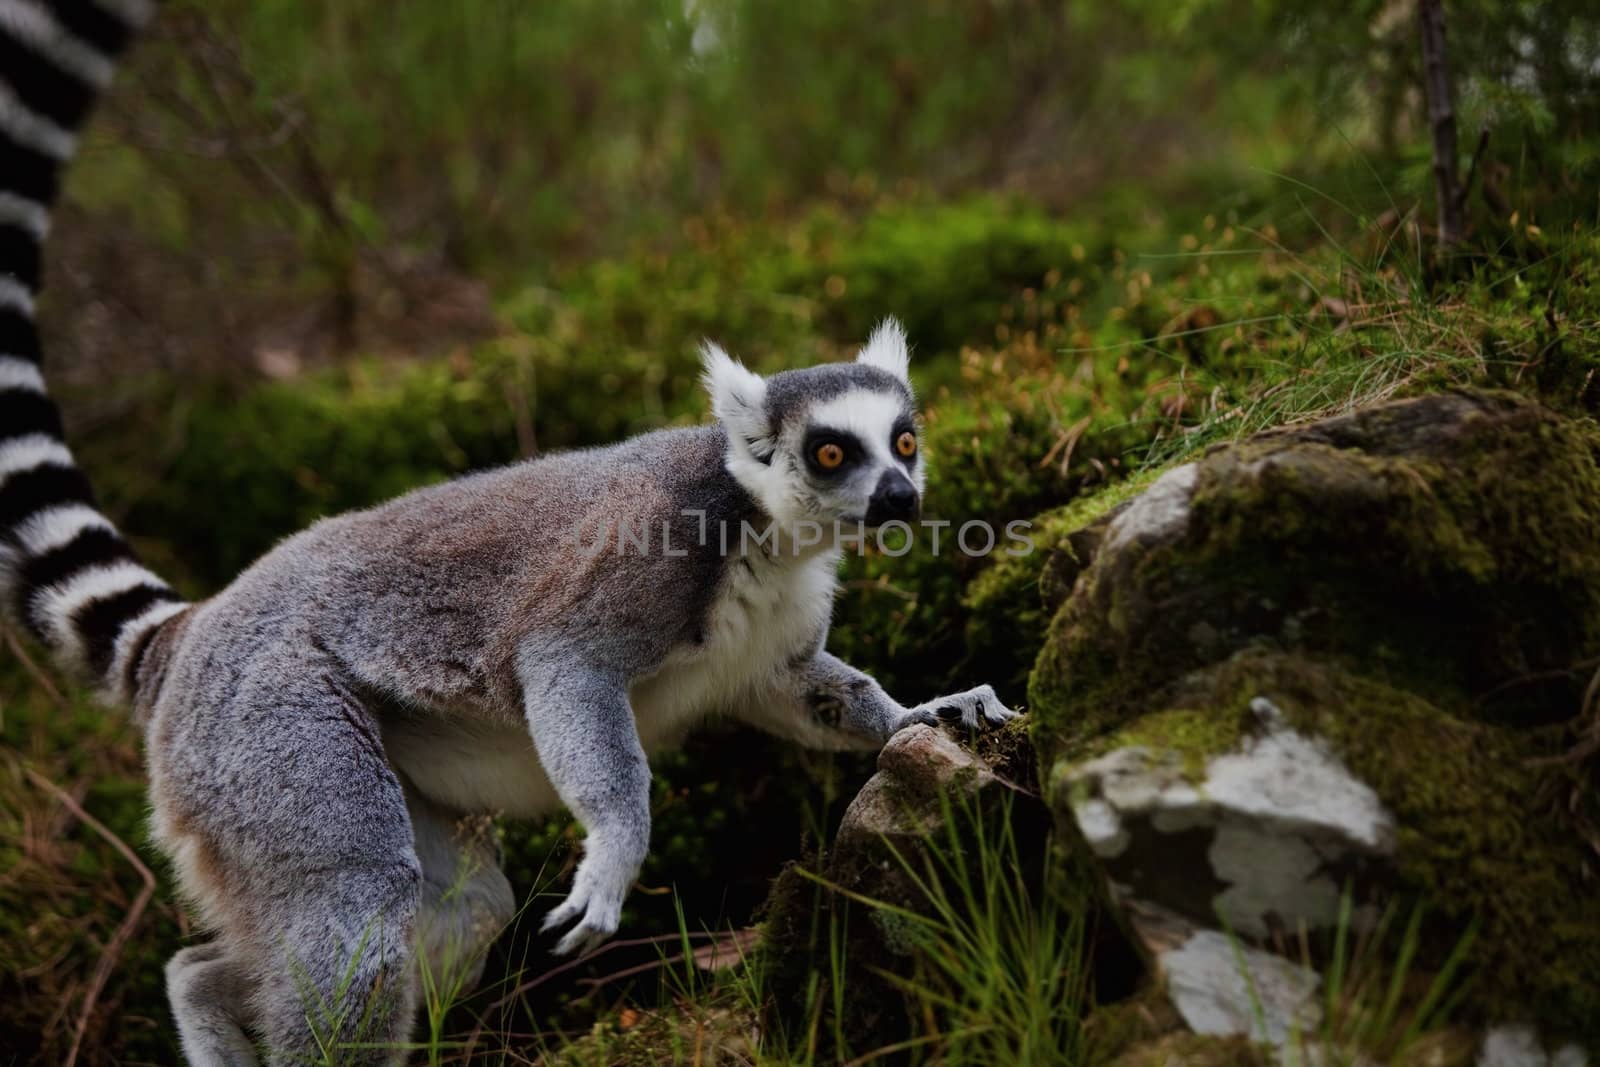 A ring-tailed lemur in the wild at night time